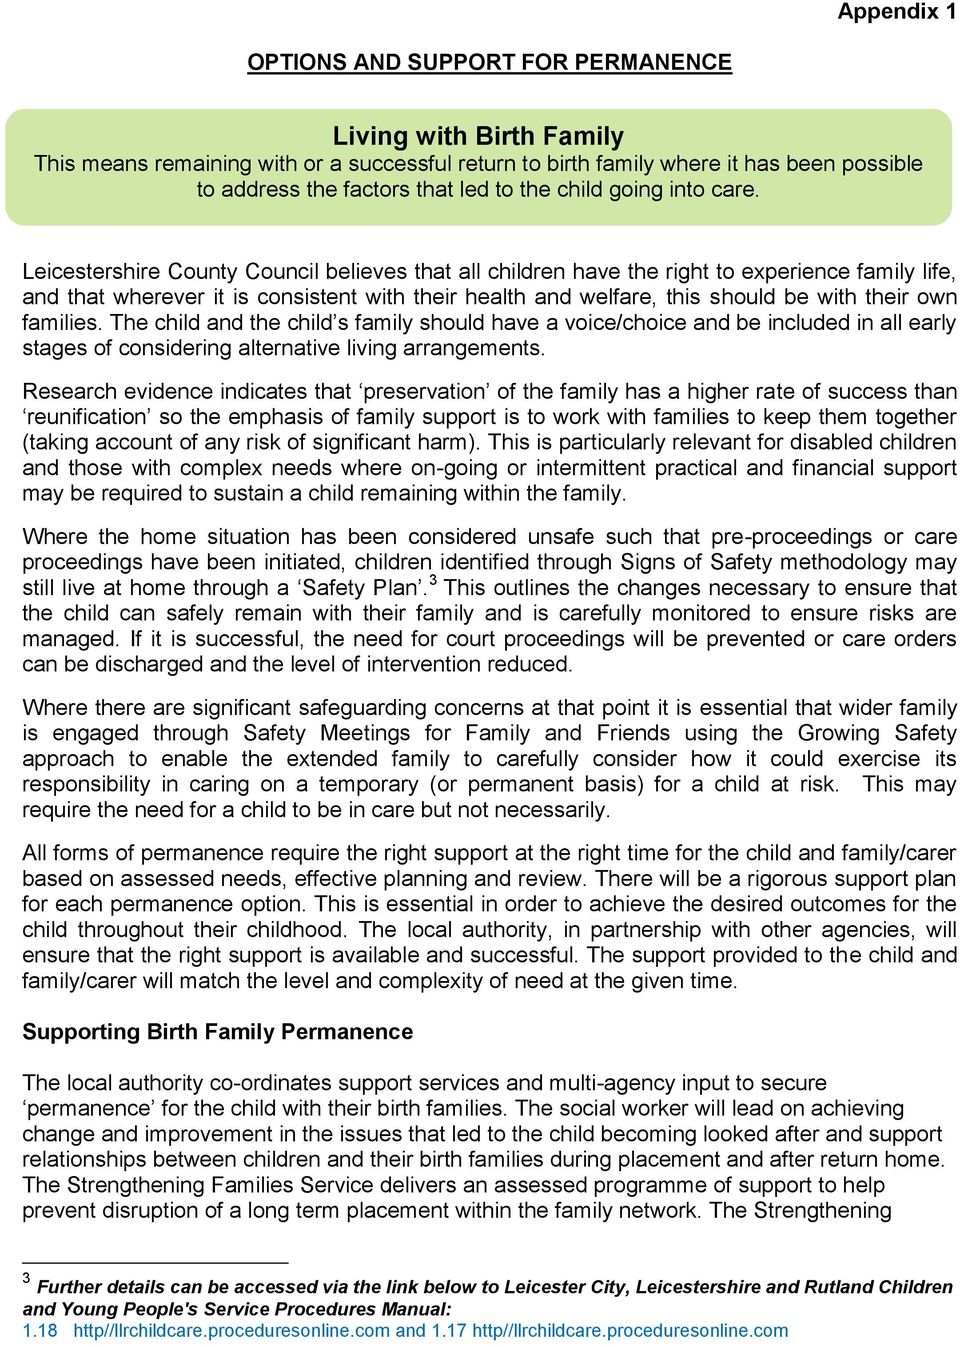 Leicestershire County Council believes that all children have the right to experience family life, and that wherever it is consistent with their health and welfare, this should be with their own